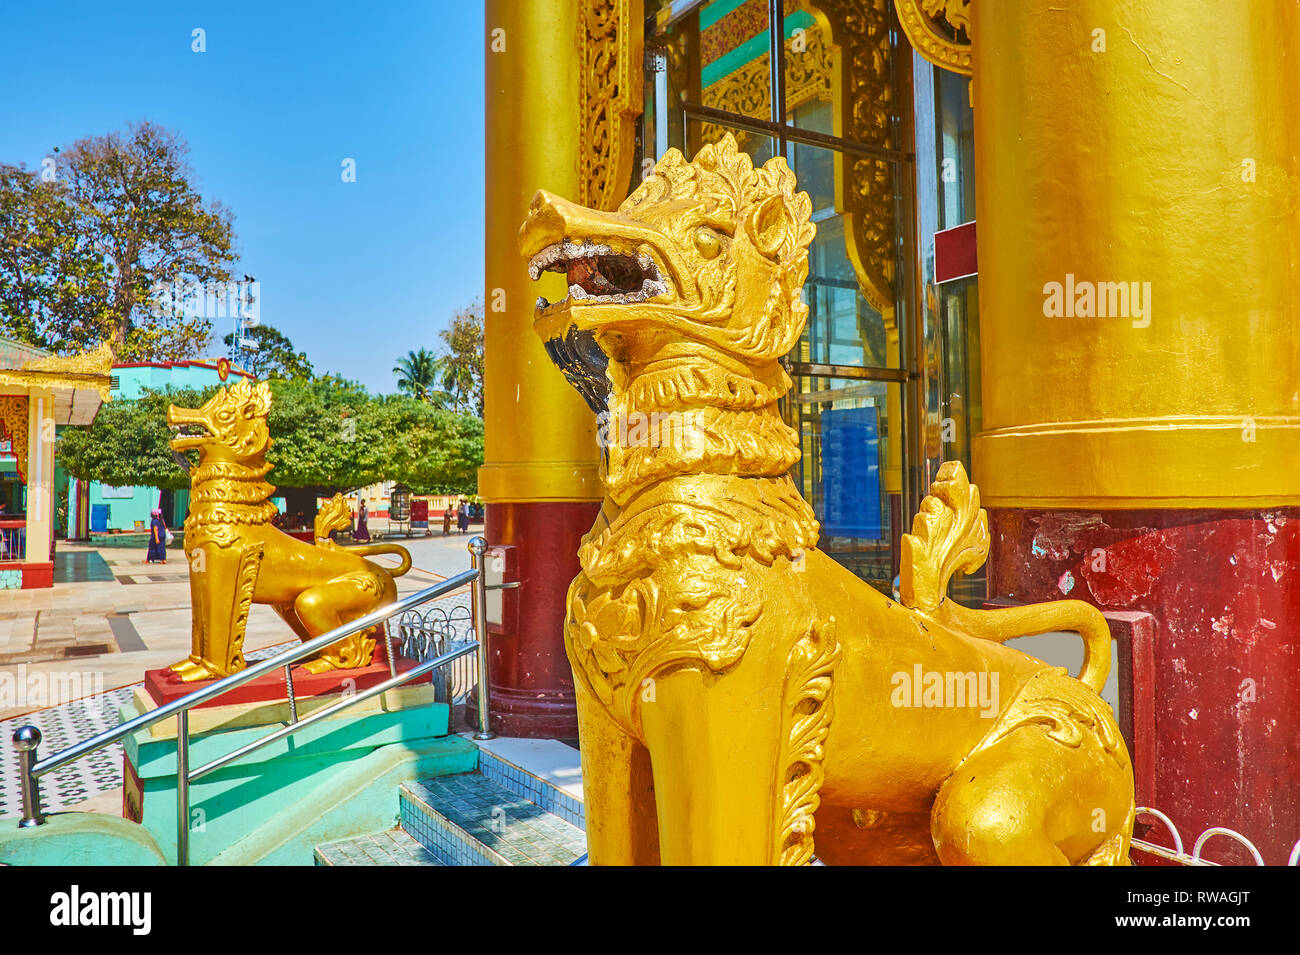 The golden statues of Burmese leogryphs (chinthe) or royal lions guard the image house of Shwemawdaw Pagoda, Bago, Myanmar. Stock Photo